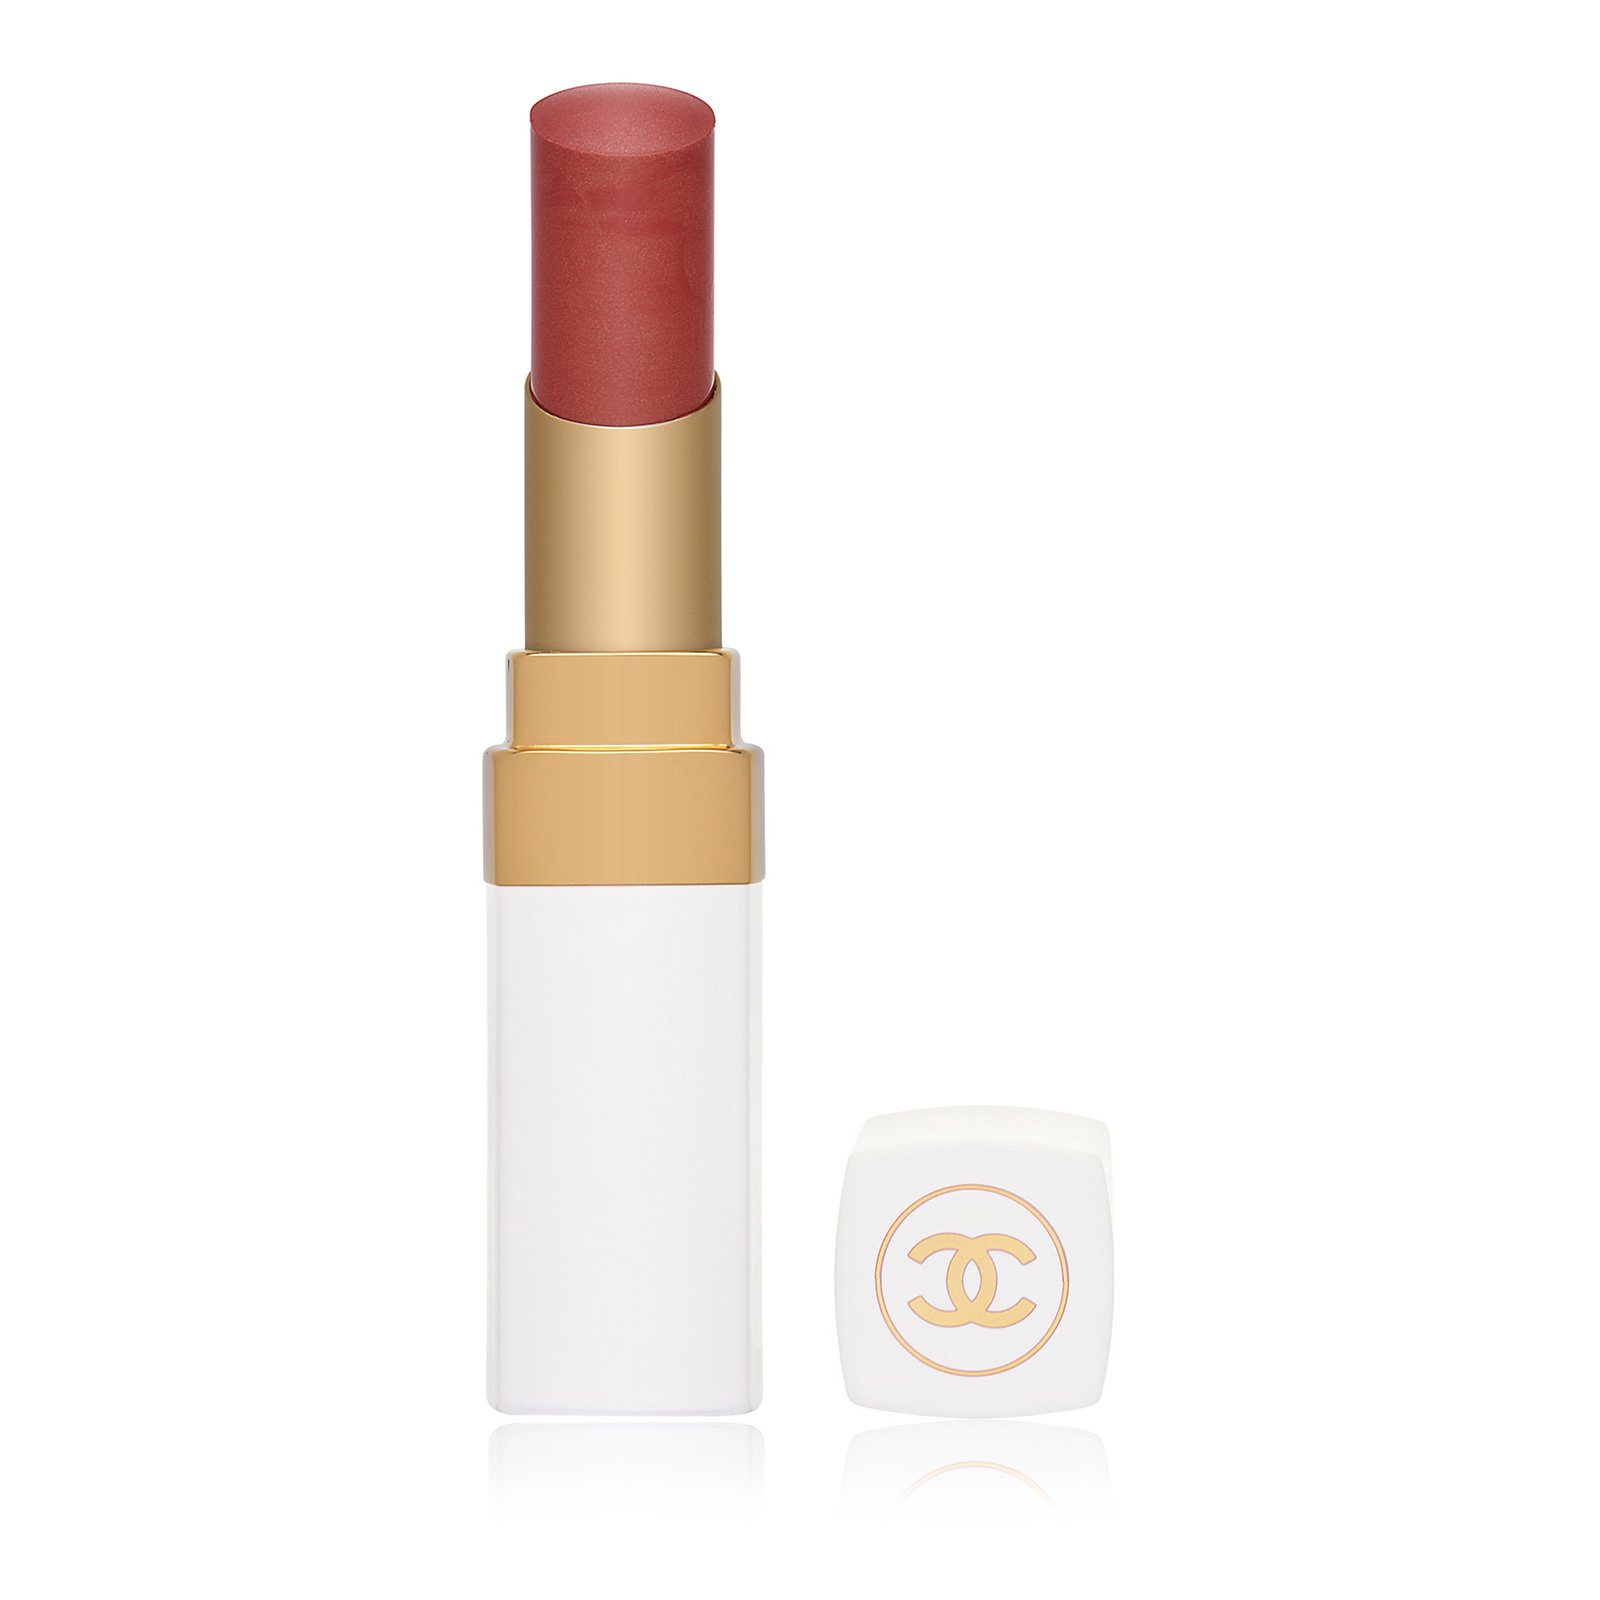 Chanel Rouge Coco Baume Hydrating Beautifying Tinted Lip Balm0.1 oz 3 g AKB  Beauty